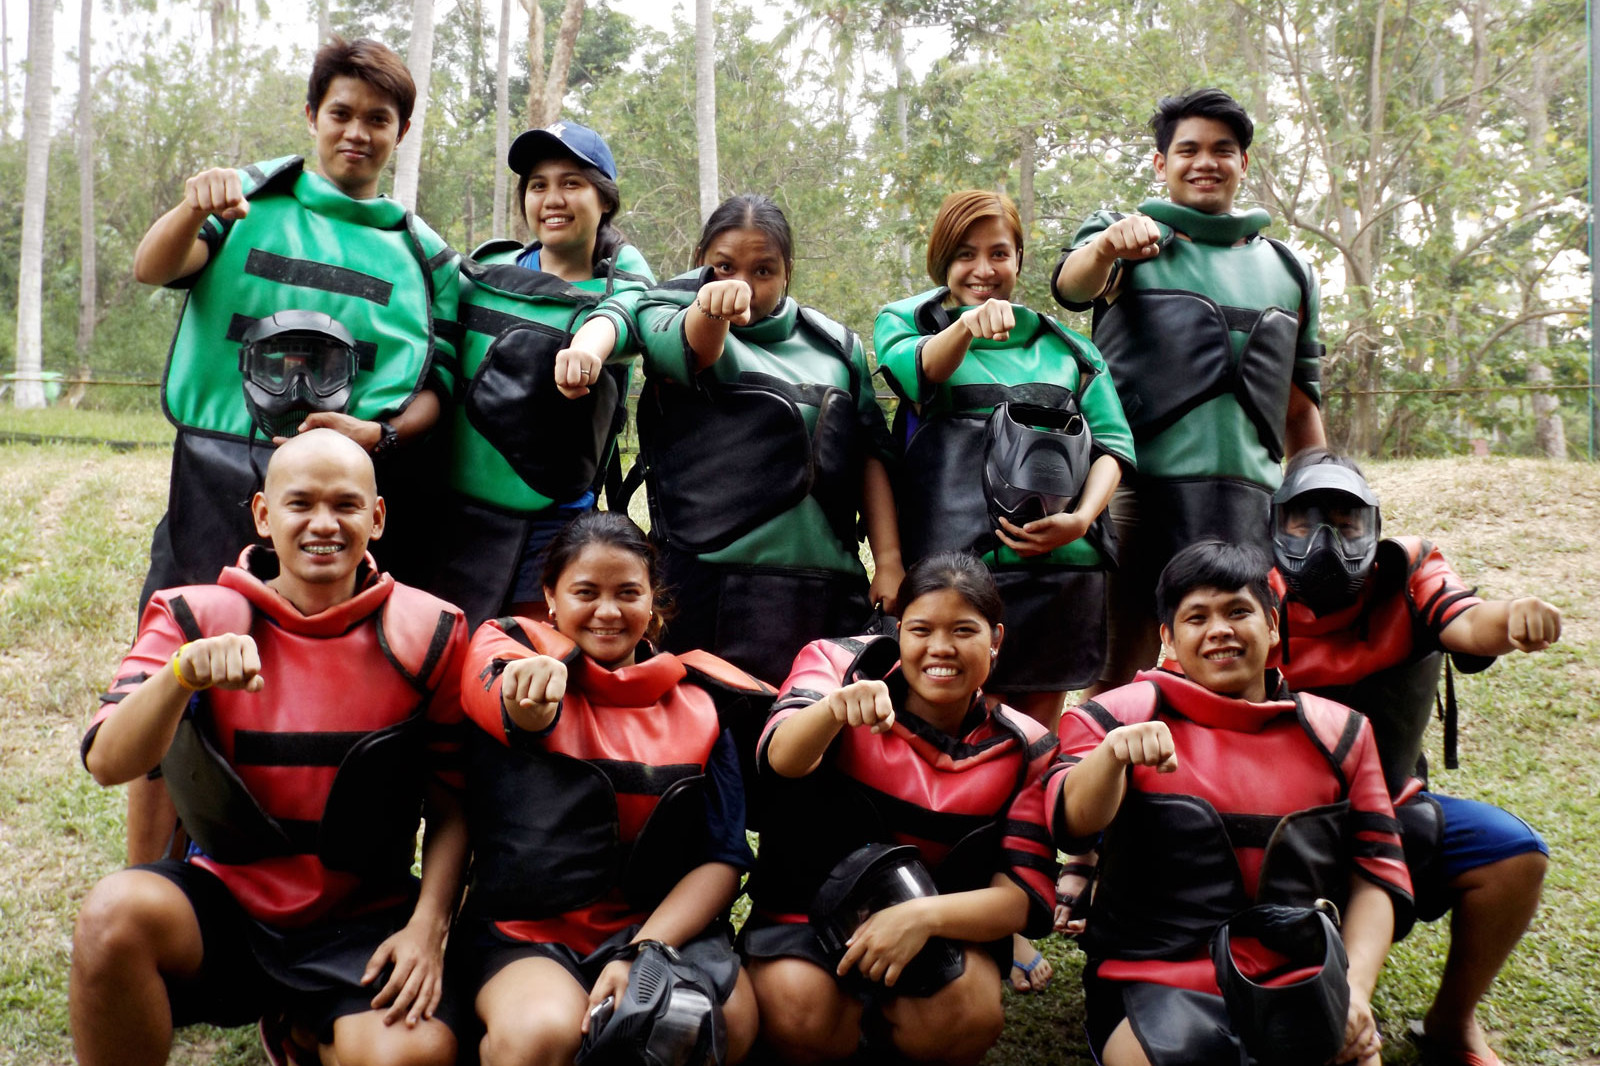 Paintball players in Extreme Sports Philippines Adventure Park in Puerto Galera.